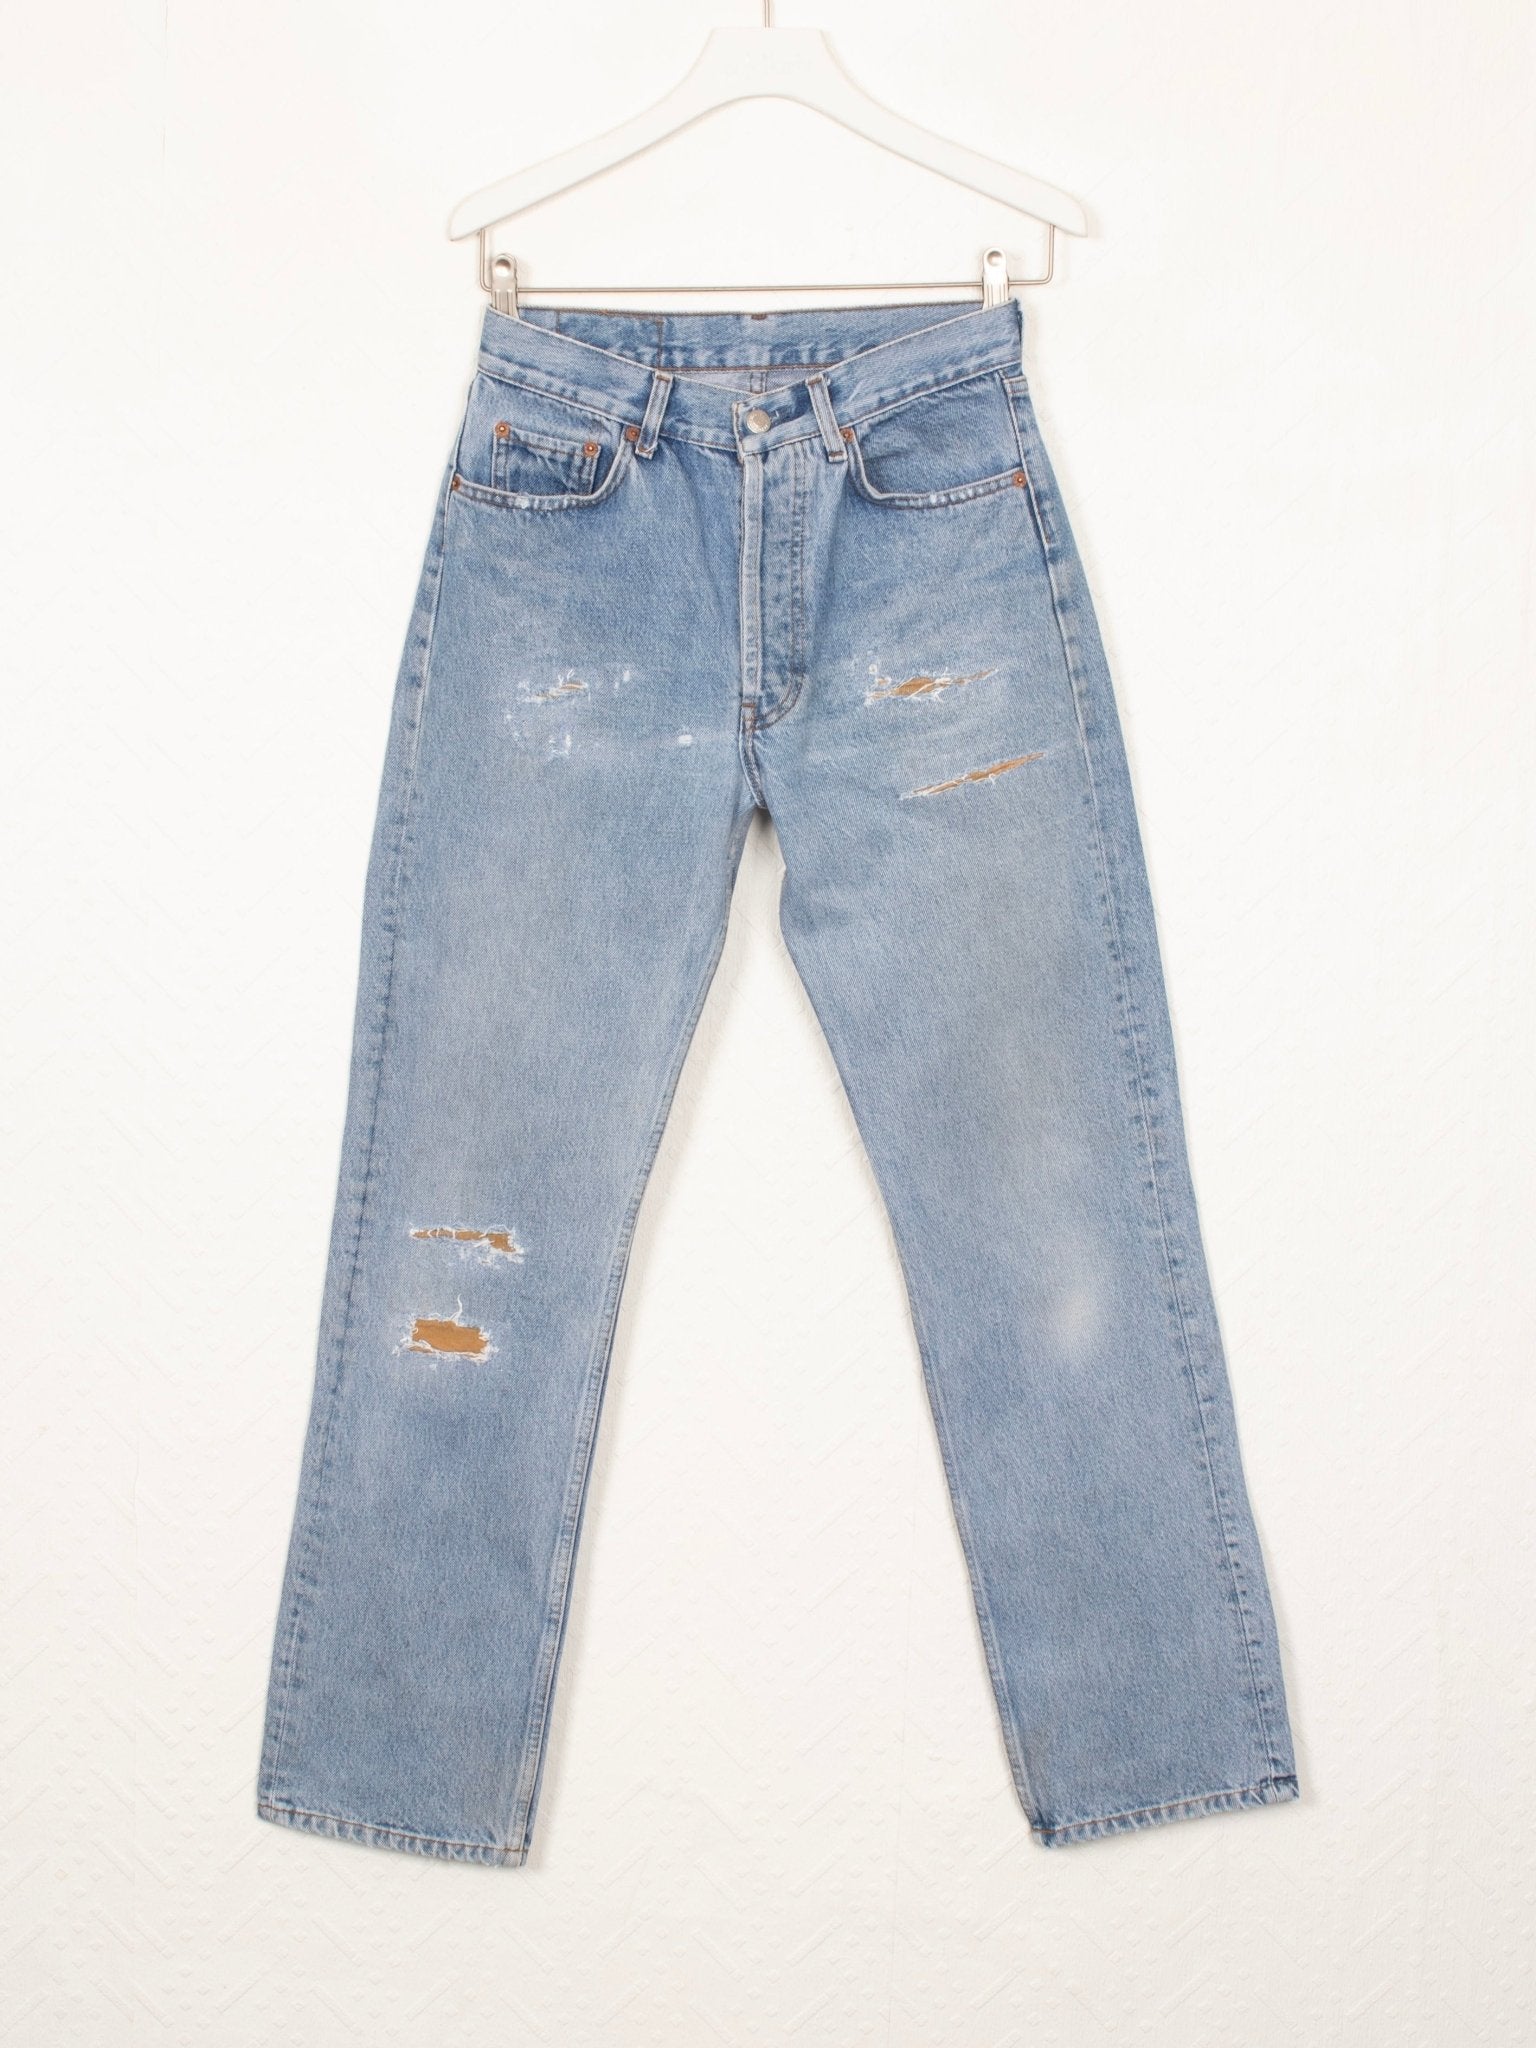 1990s Levi's 501 Faded Blue